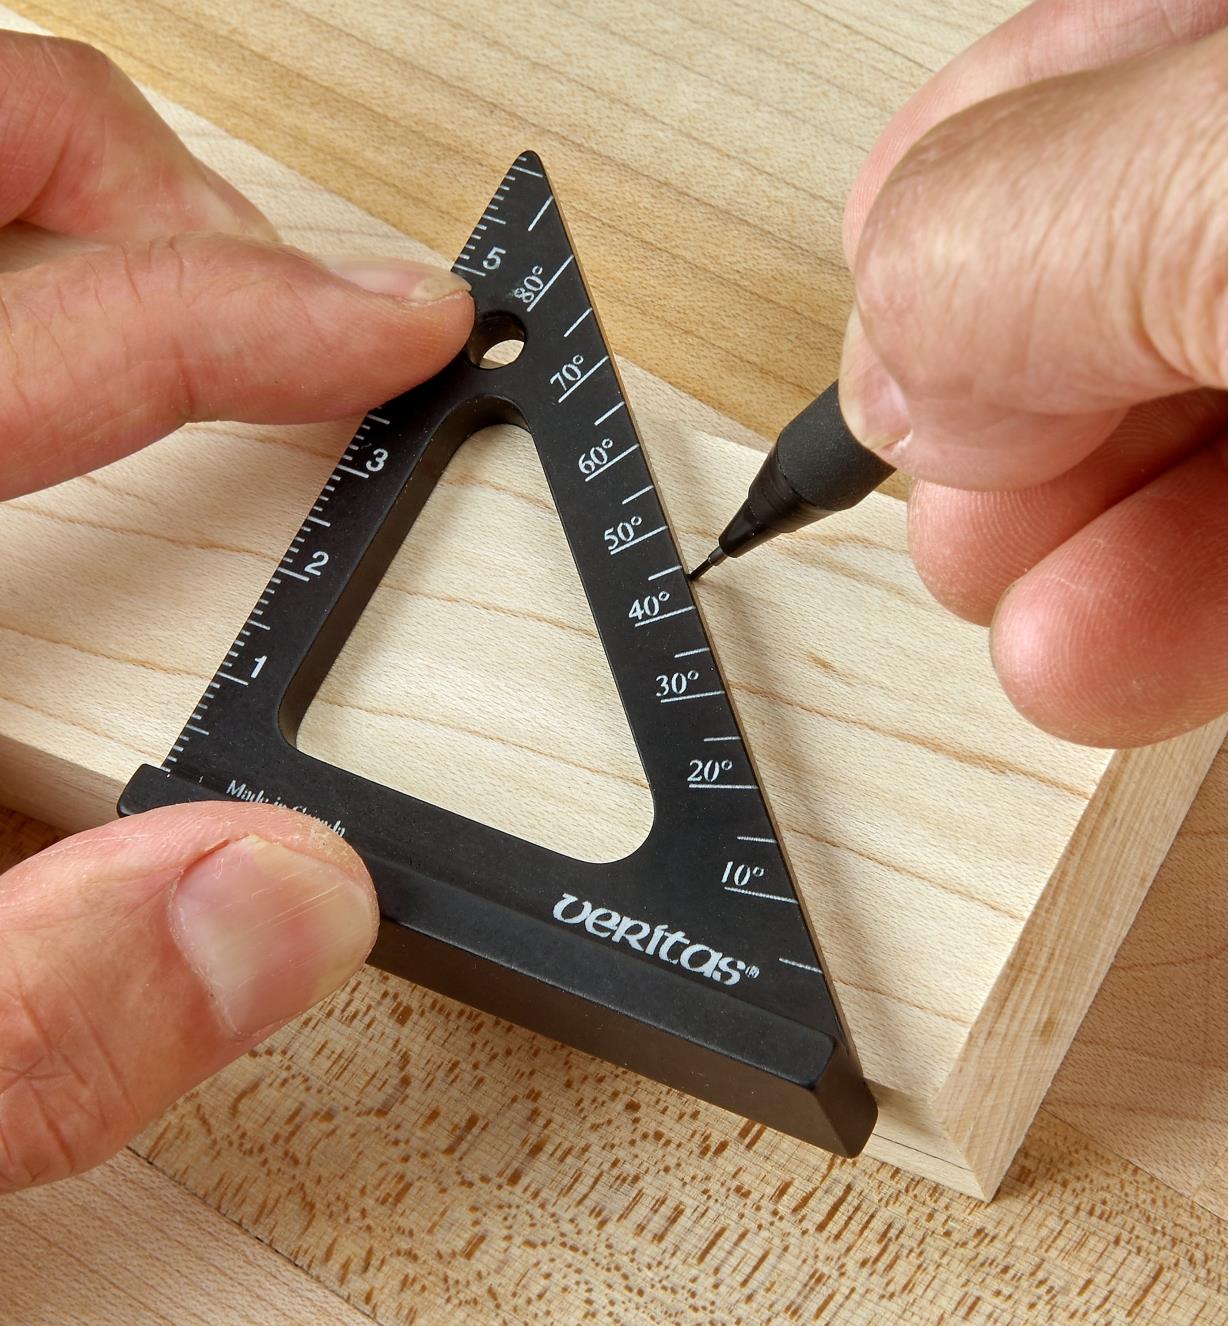 Marking against the 45° side of a 60mm pocket layout square with a pencil to lay out a miter cut